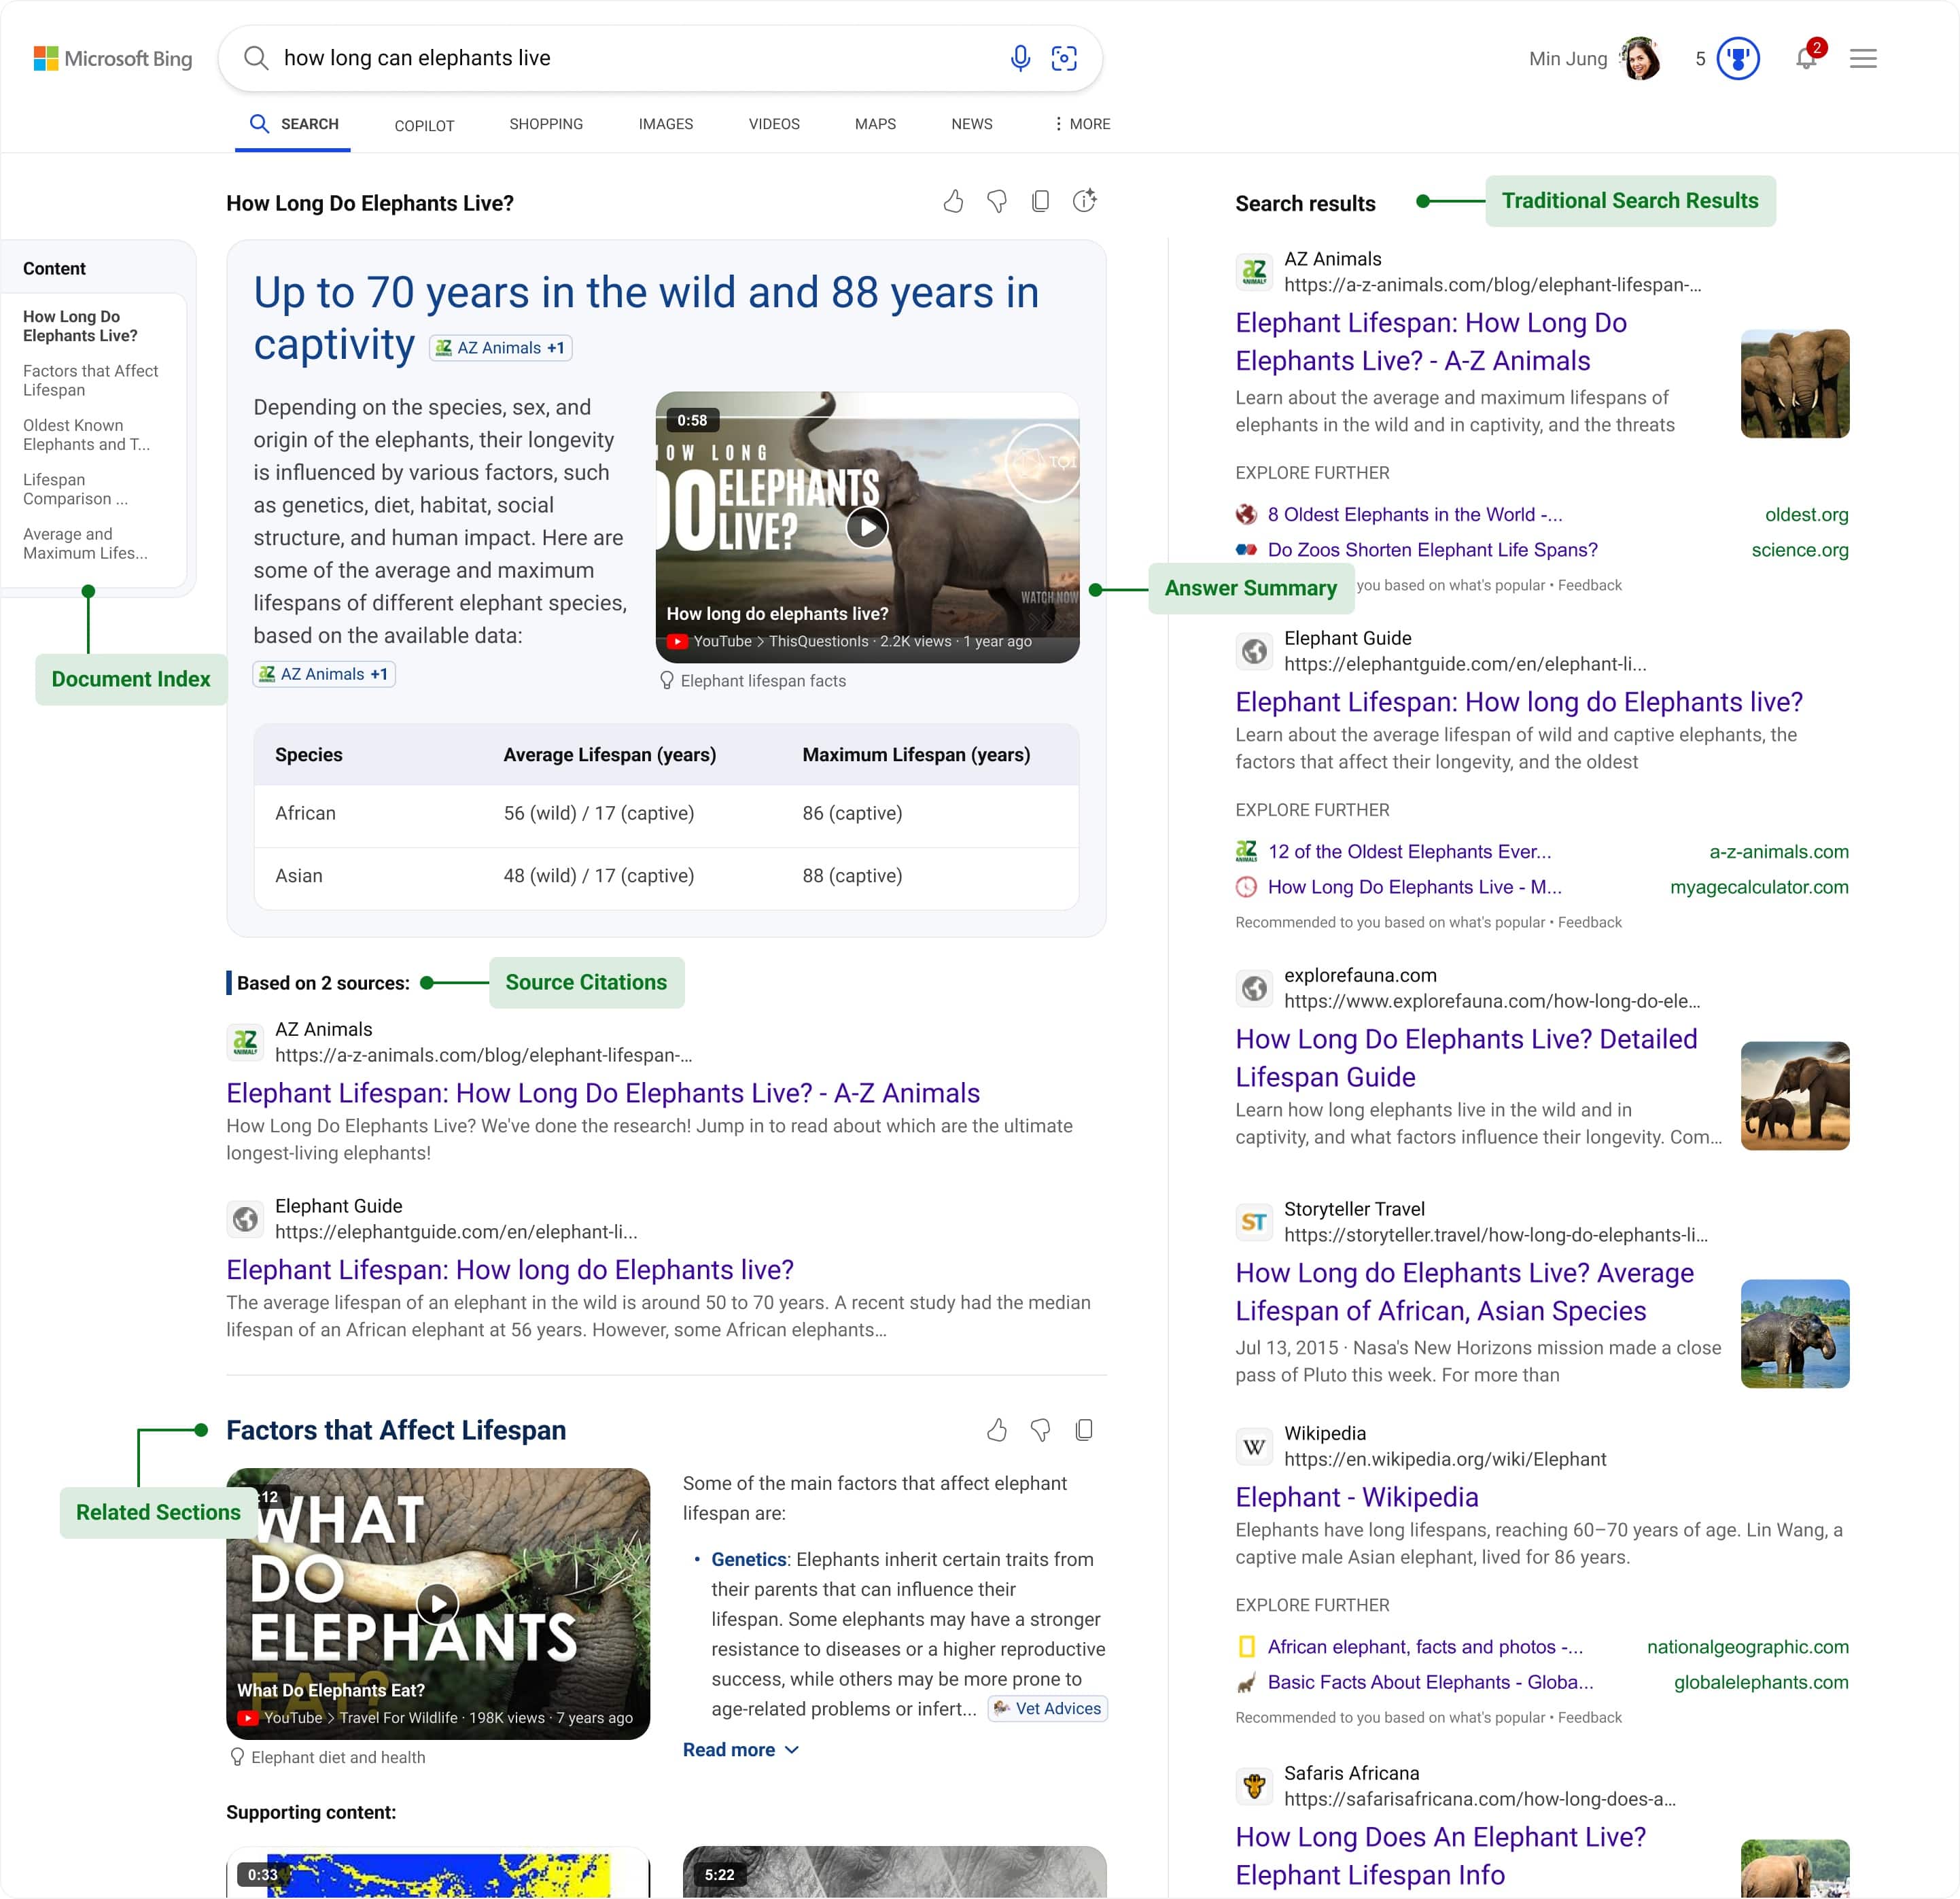 The new Bing search page with AI